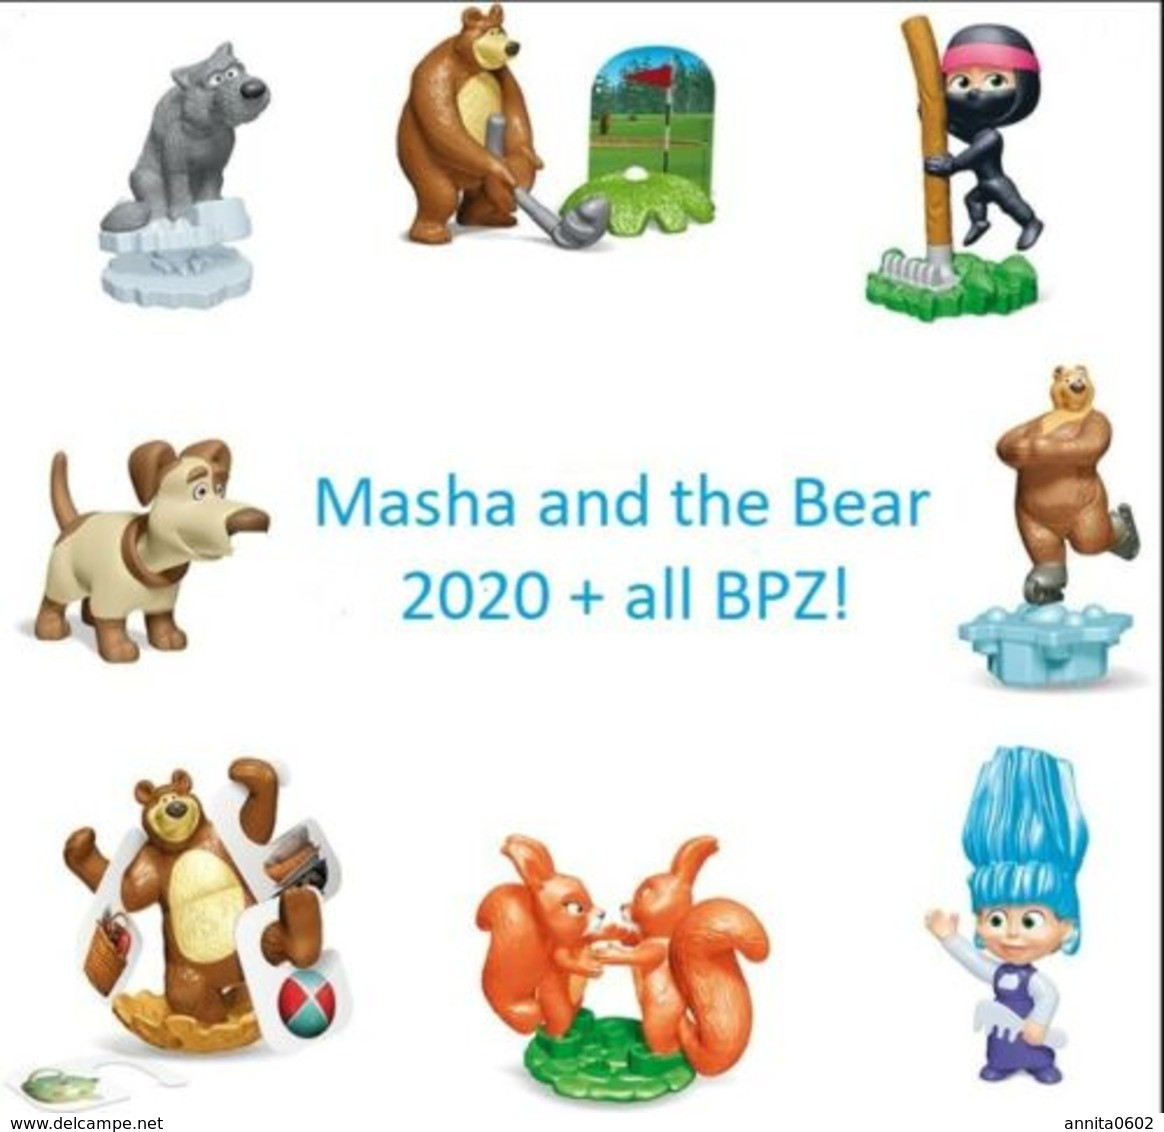 2020 Russia Masha And The Bear 7 Kinder Surprise EN533 - EN571 FULL Set +all Papers Toys From Kinder Egg FREE SHIP - Diddl